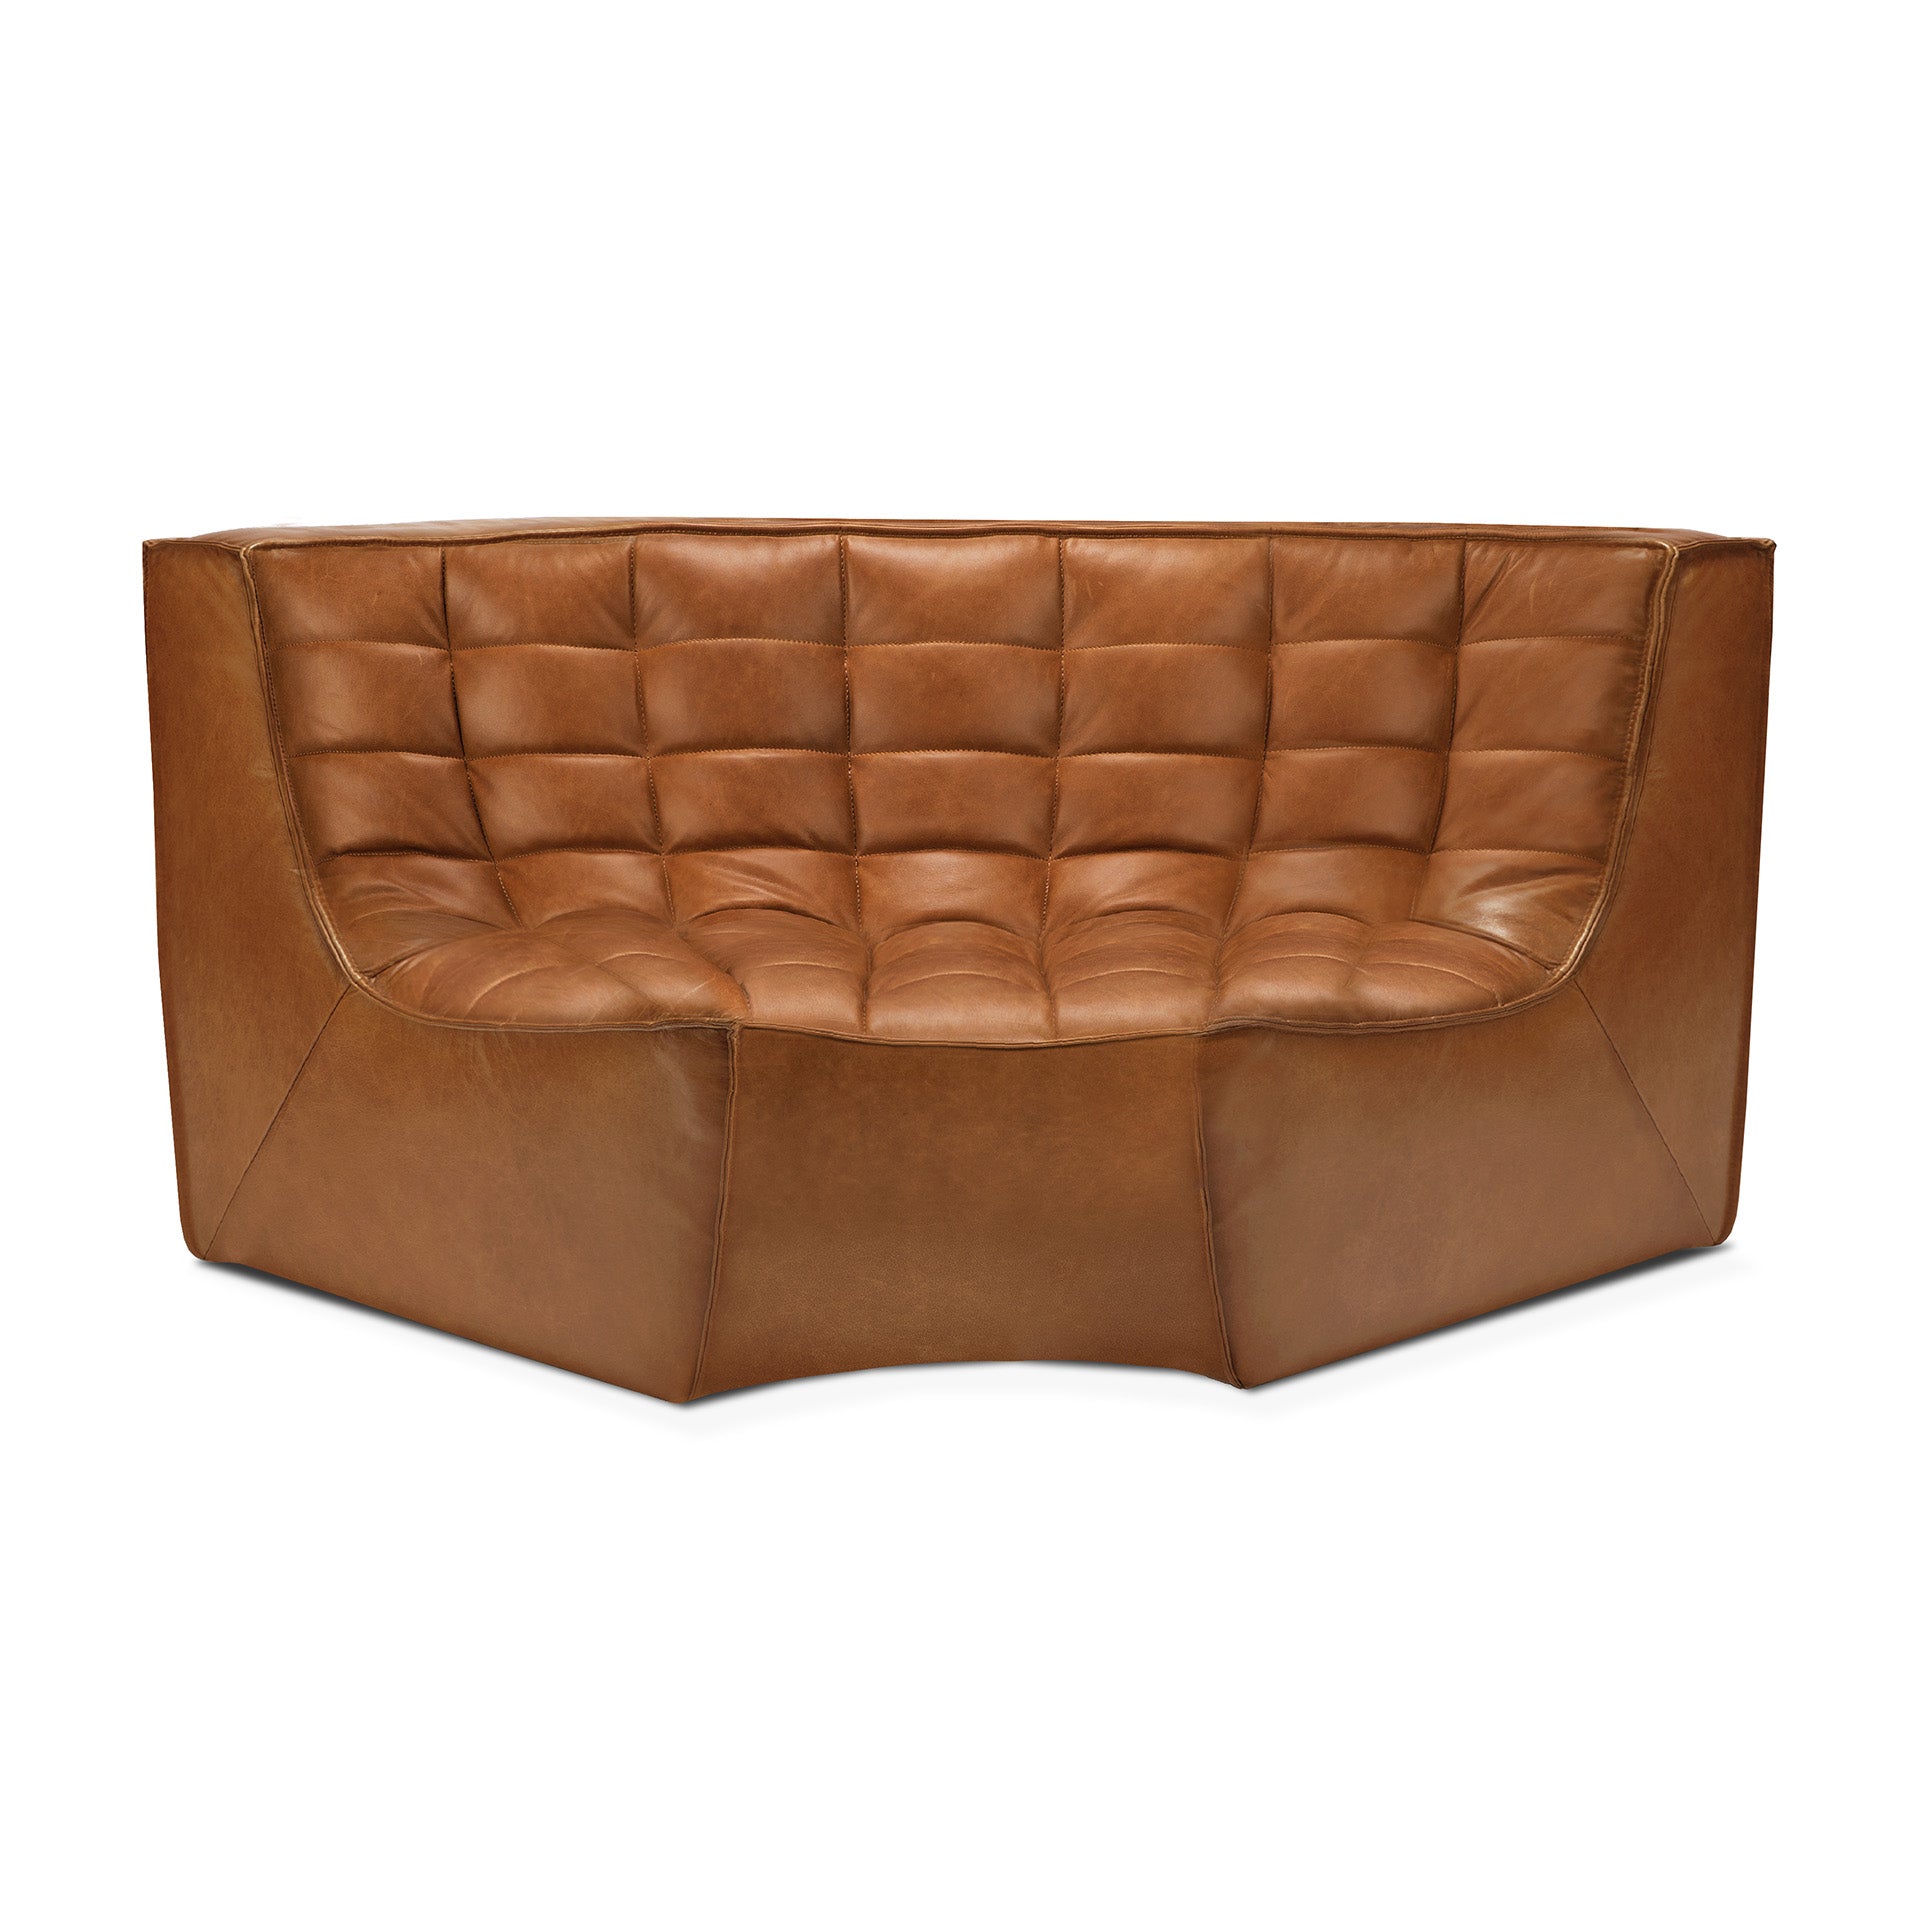 N701 Ethnicraft Slouch Sofa in Old Saddle Leather available from Make Your House A Home, Bendigo, Victoria, Australia